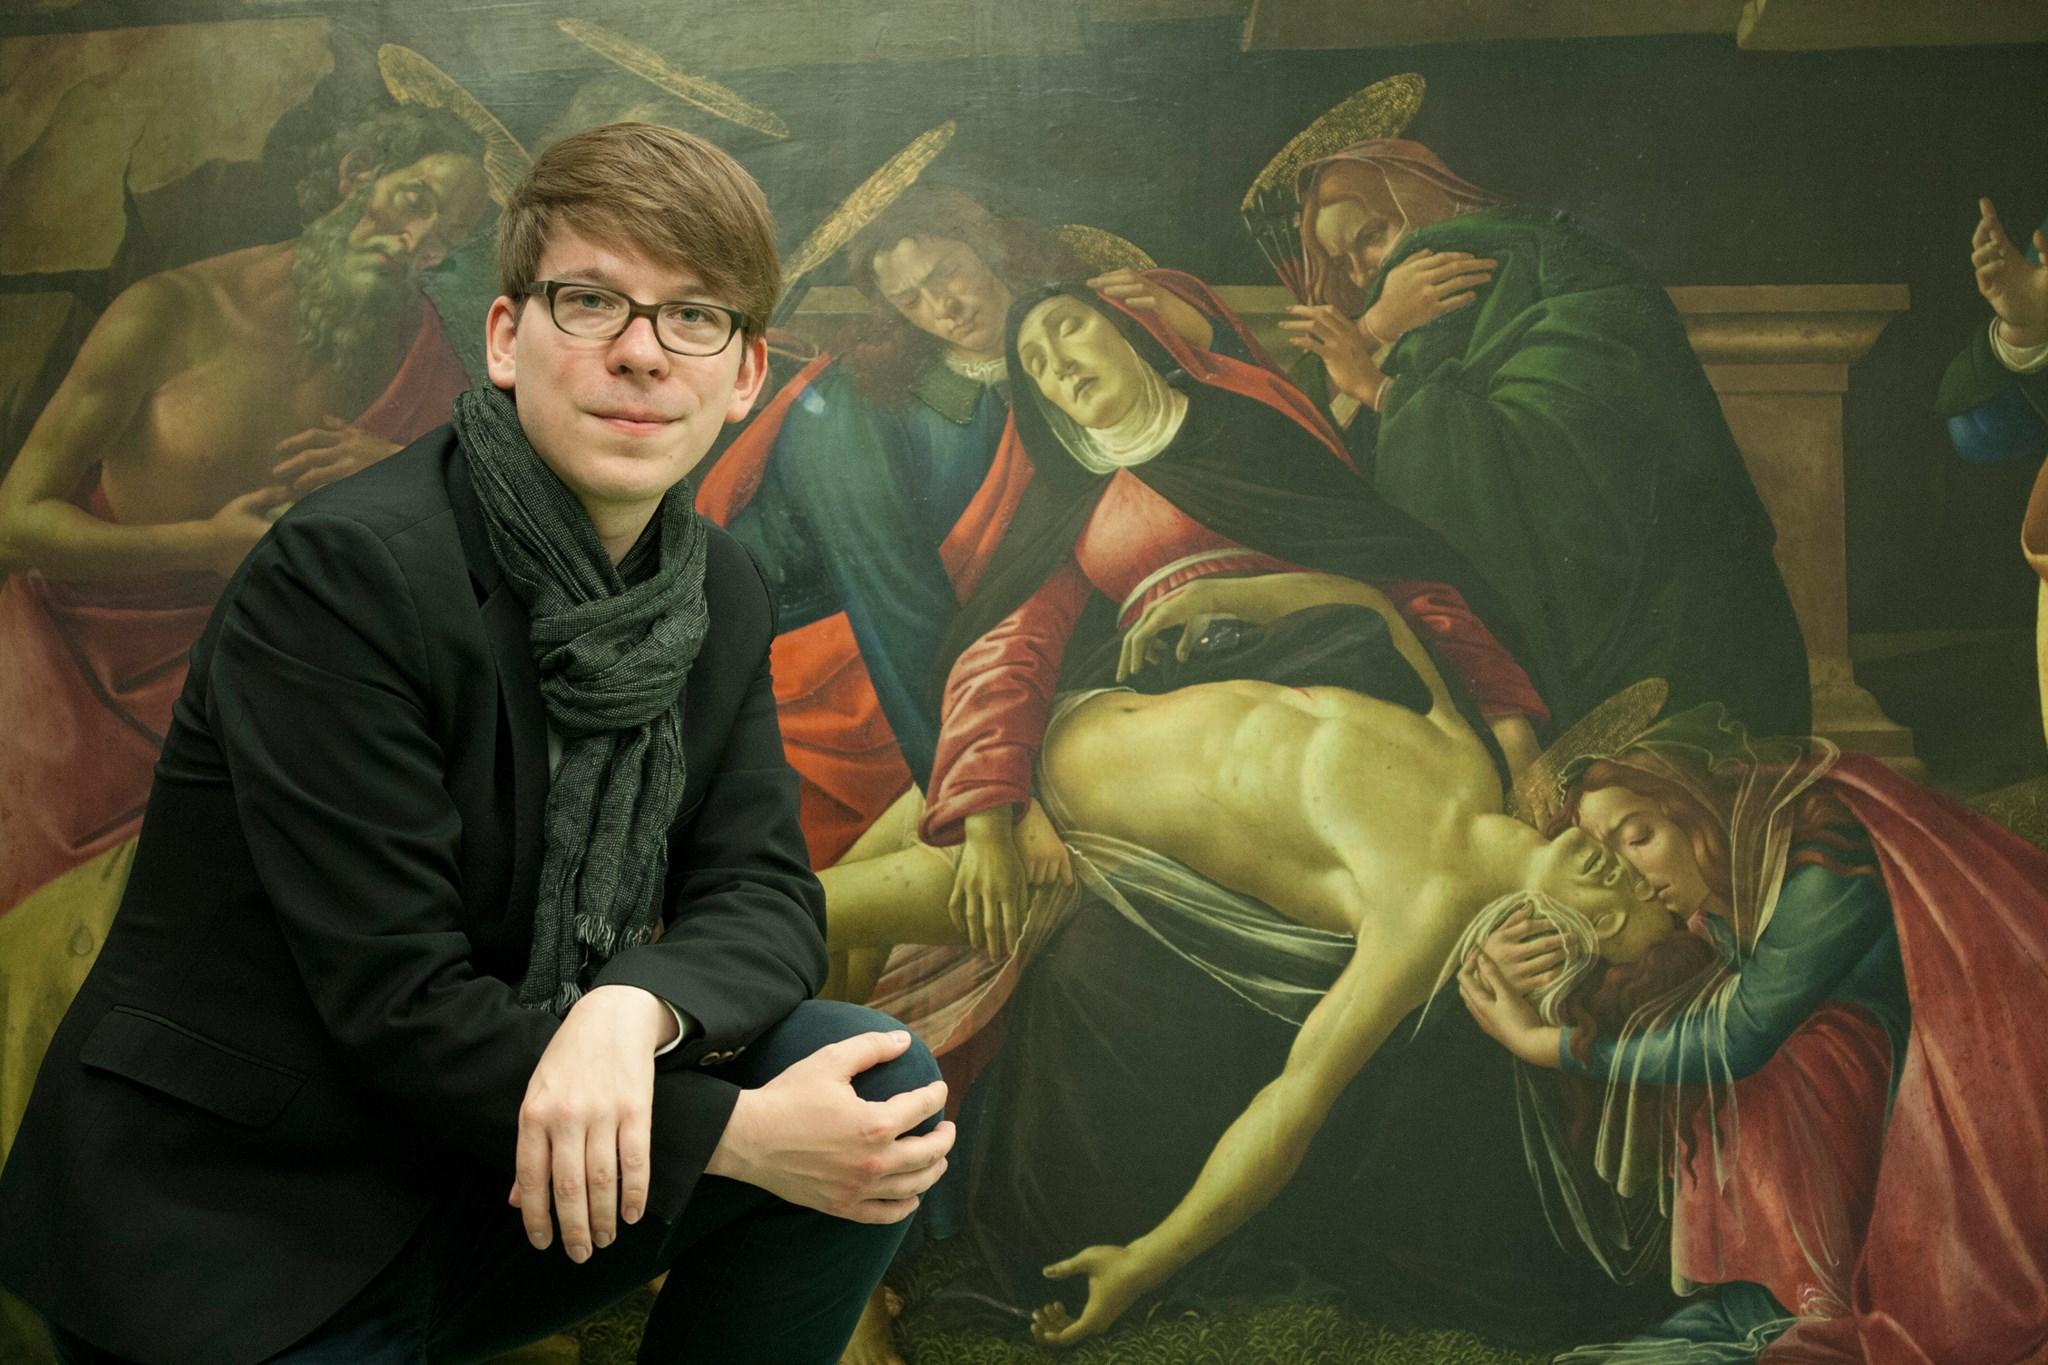 The Department would like to congratulate former undergraduate student, Alexander Röstel, on his appointment as the Simon Sainsbury Curatorial Fellow at The National Gallery in London